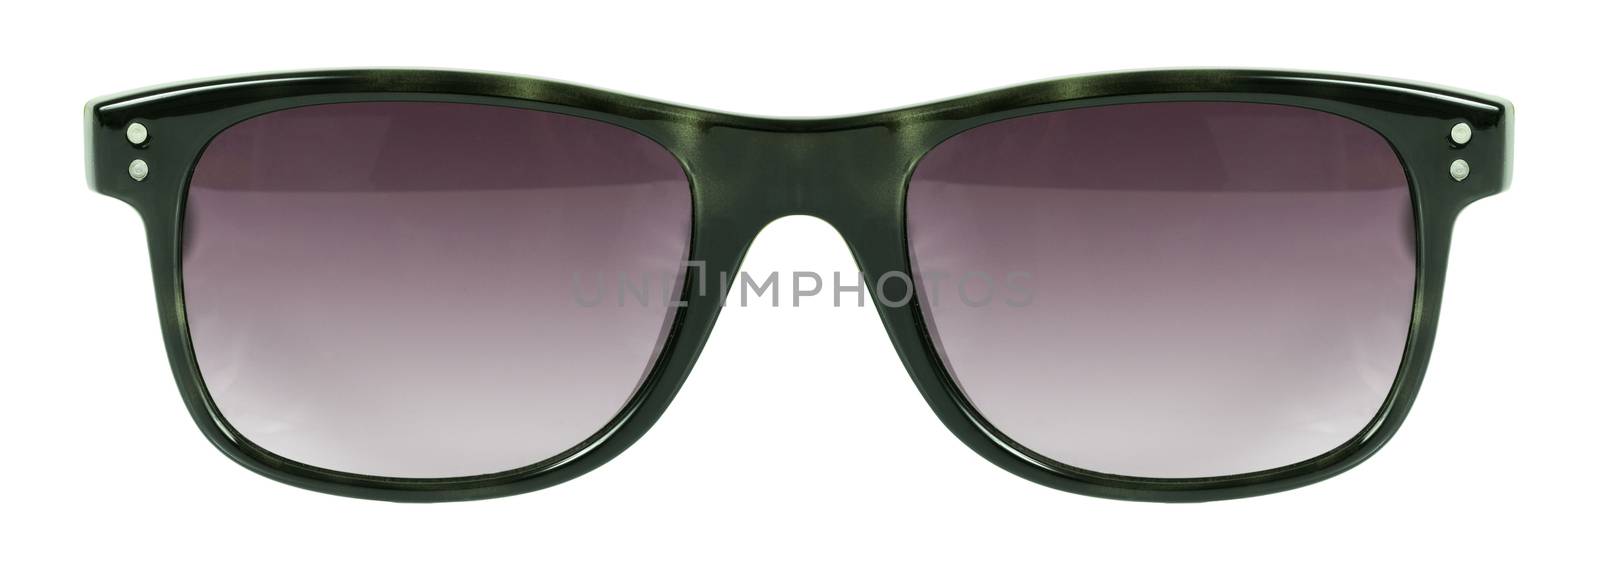 Sunglasses green frame and red color lens isolated against a cle by keneaster